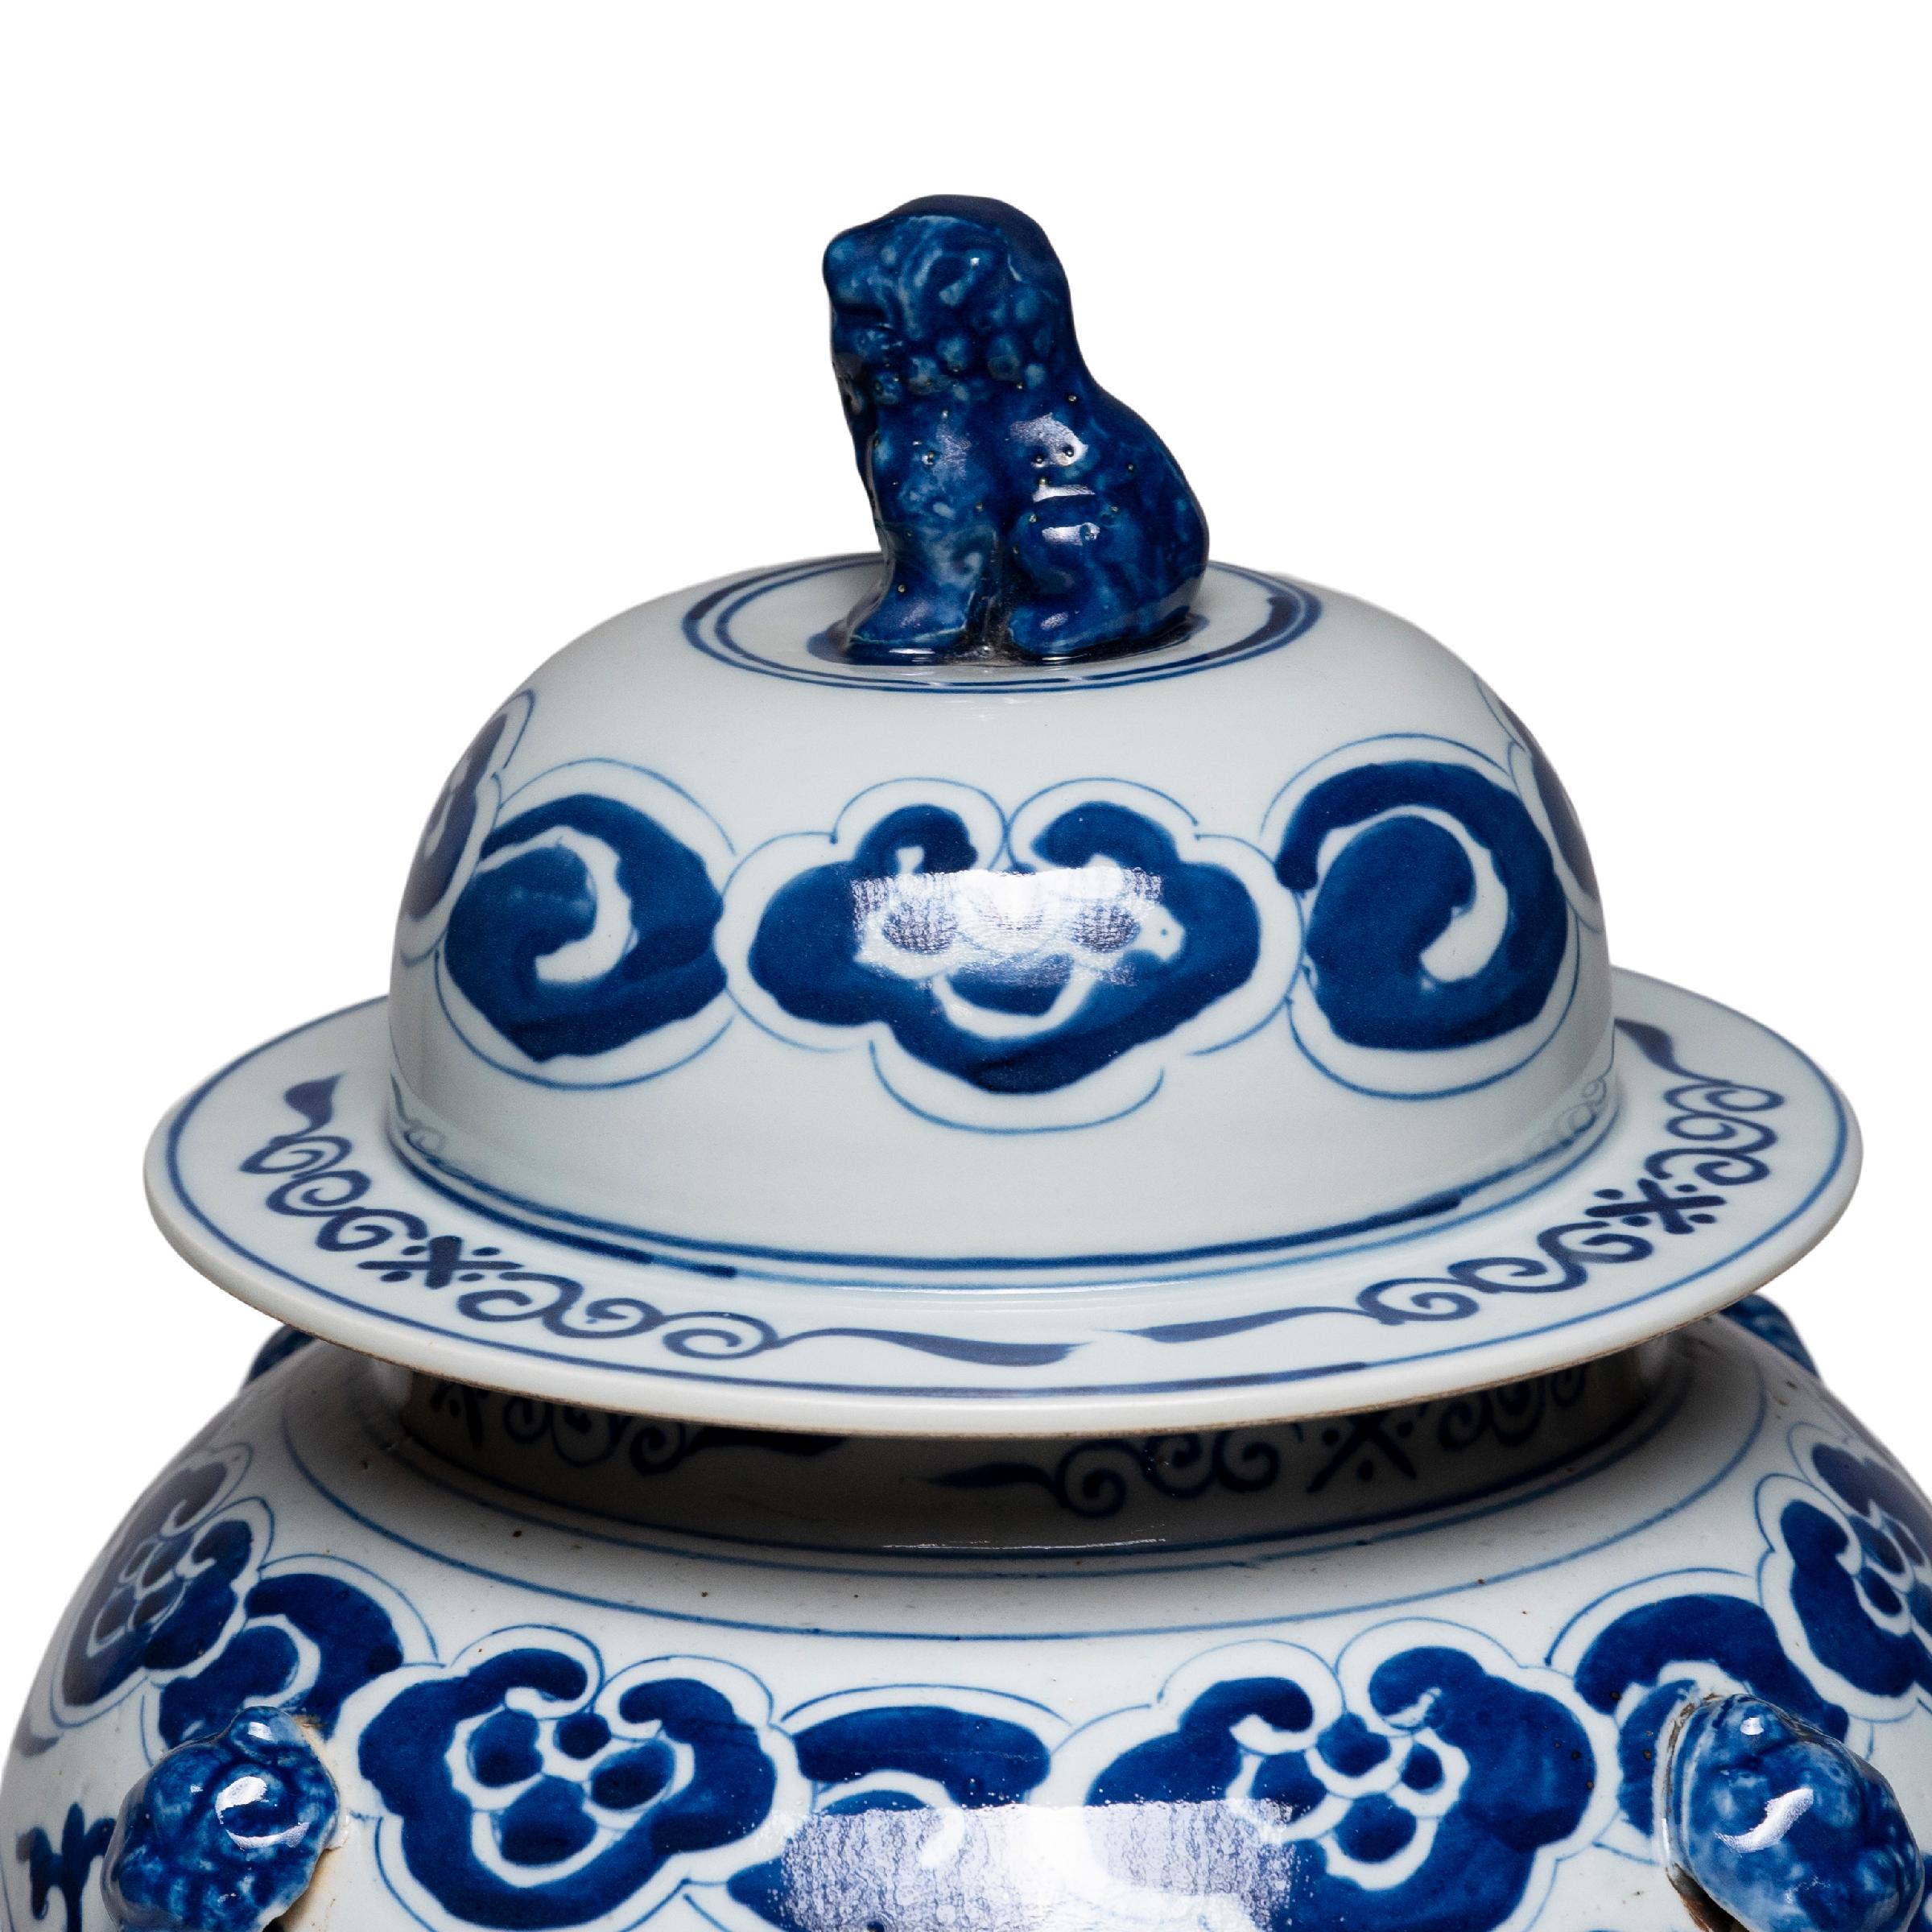 Porcelain Chinese Blue and White Scholars' Garden Baluster Jar For Sale